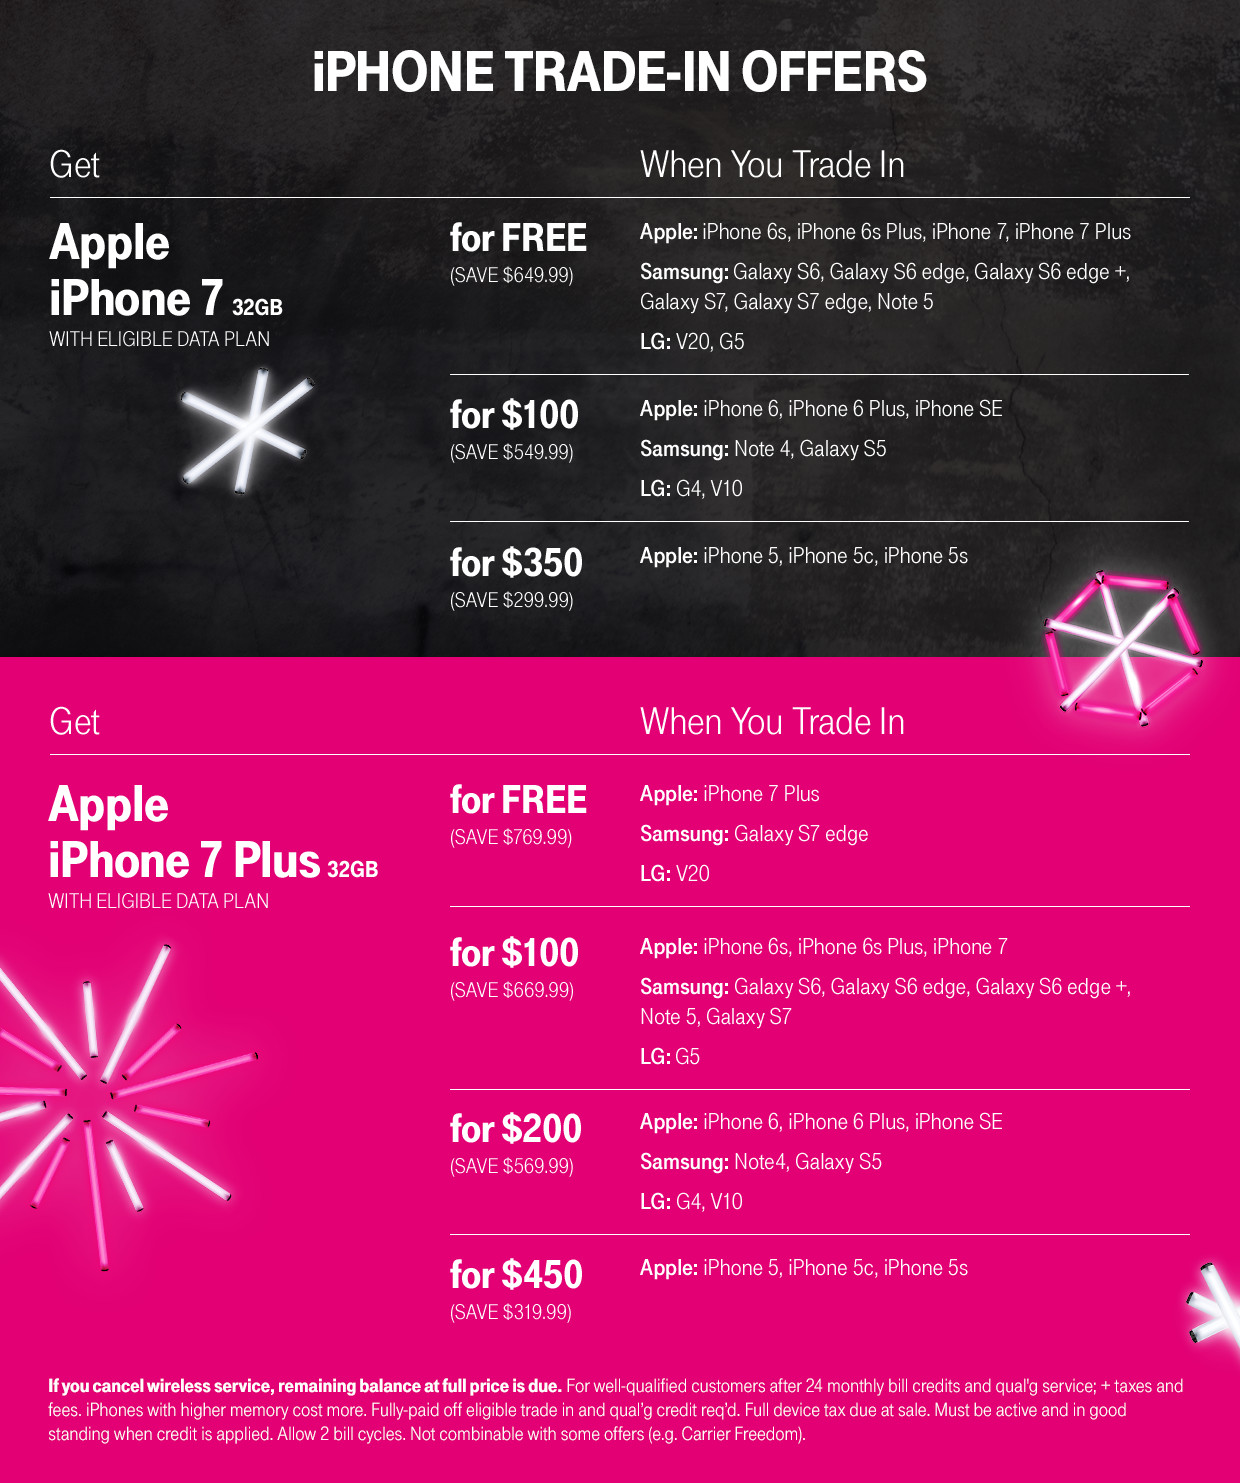 T-Mobile Announces Free iPhone 7 With Trade-In for Black Friday, Free Hour of In-Flight Wi-Fi for Everyone